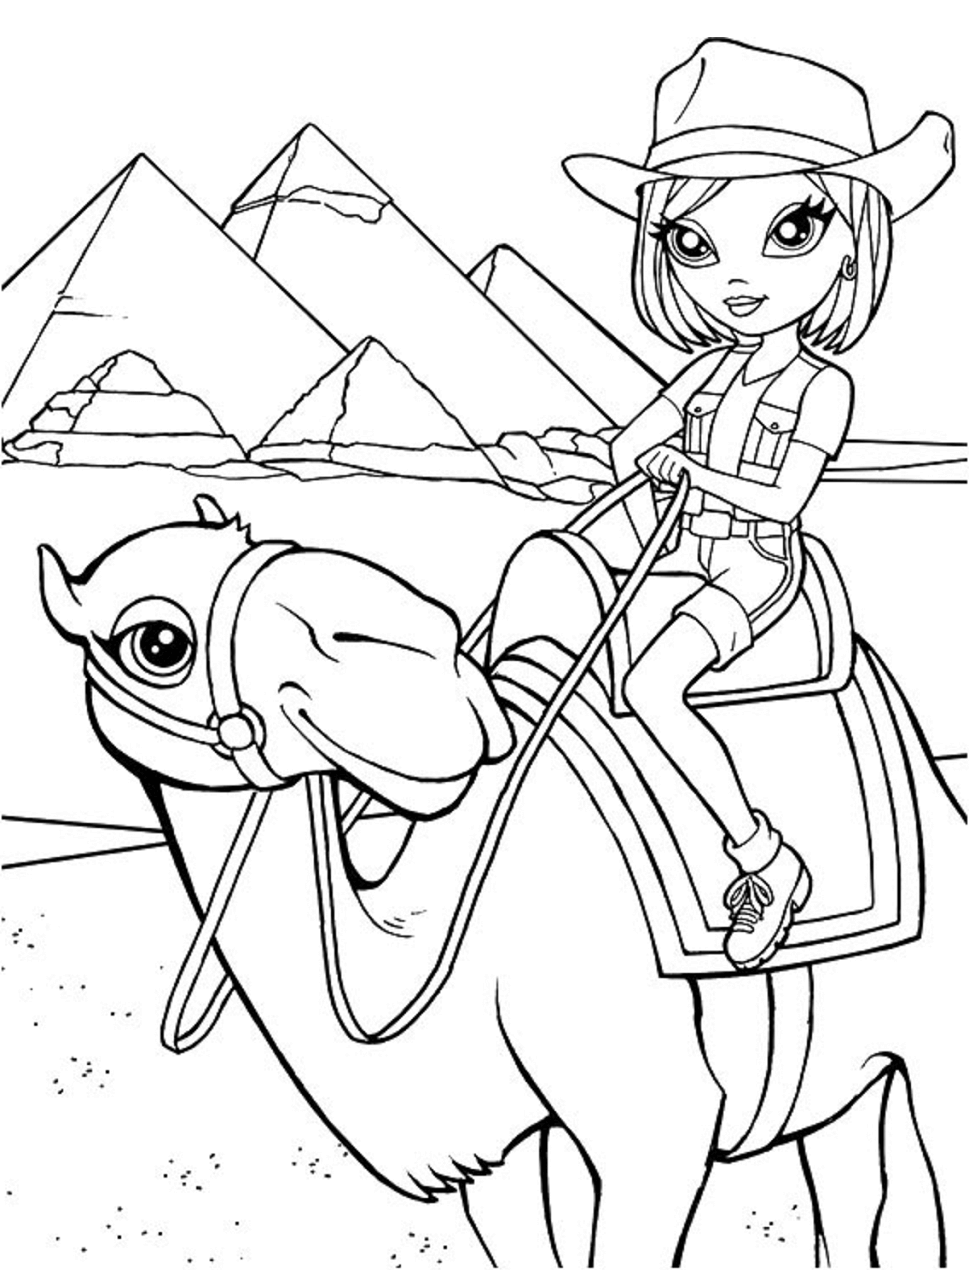 Cowgirl In Lisa Frank Coloring Page Free Printable Coloring Pages For Kids